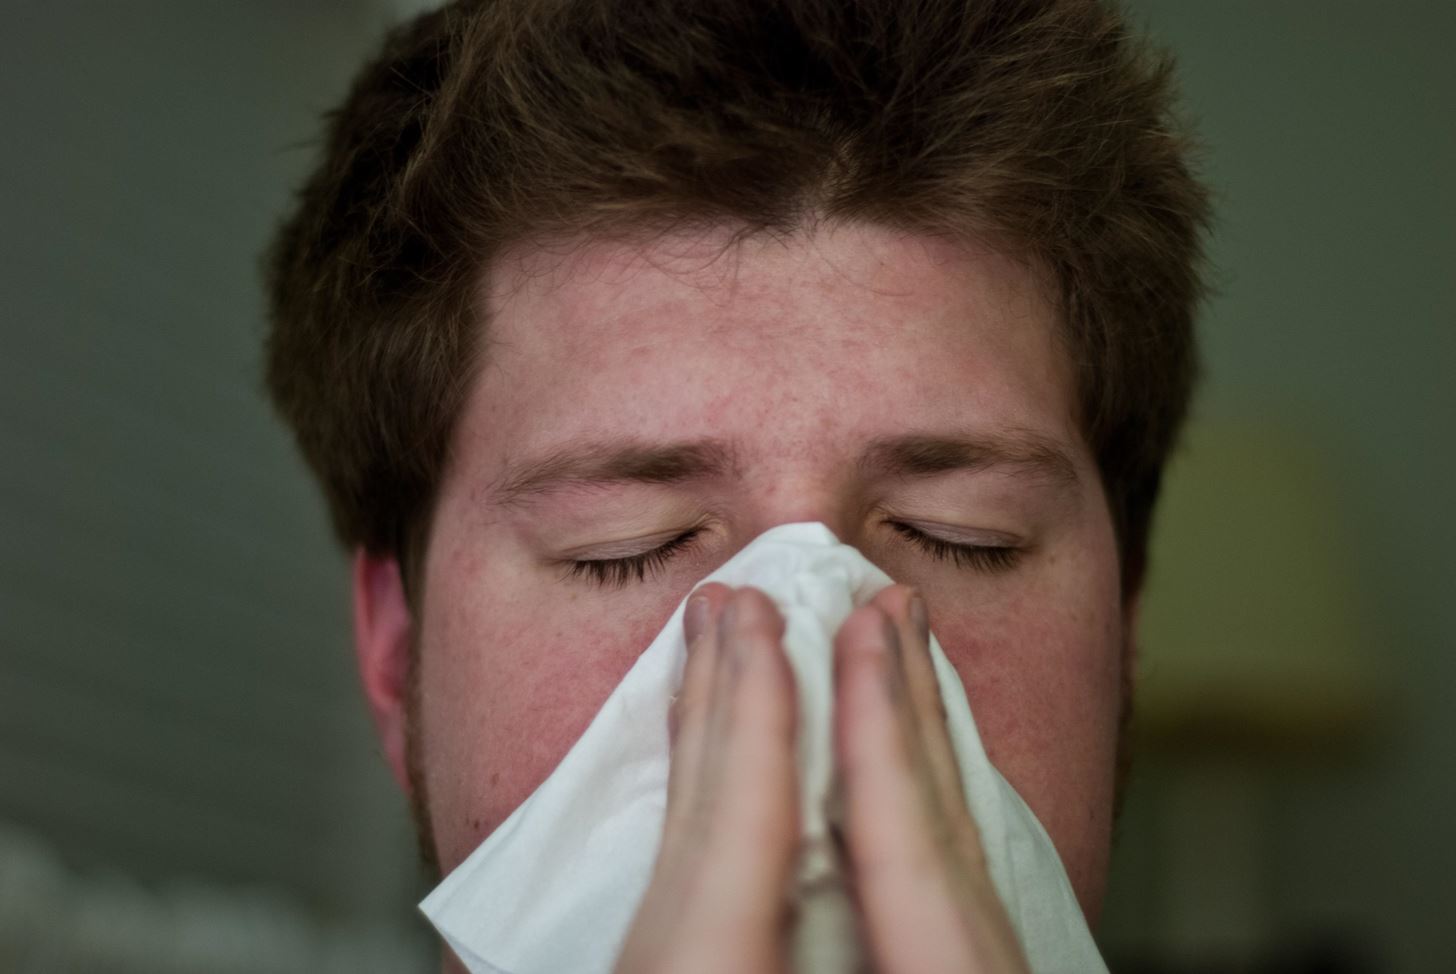 Clear Your Stuffy Sinuses in Seconds Using Nothing but Pressure